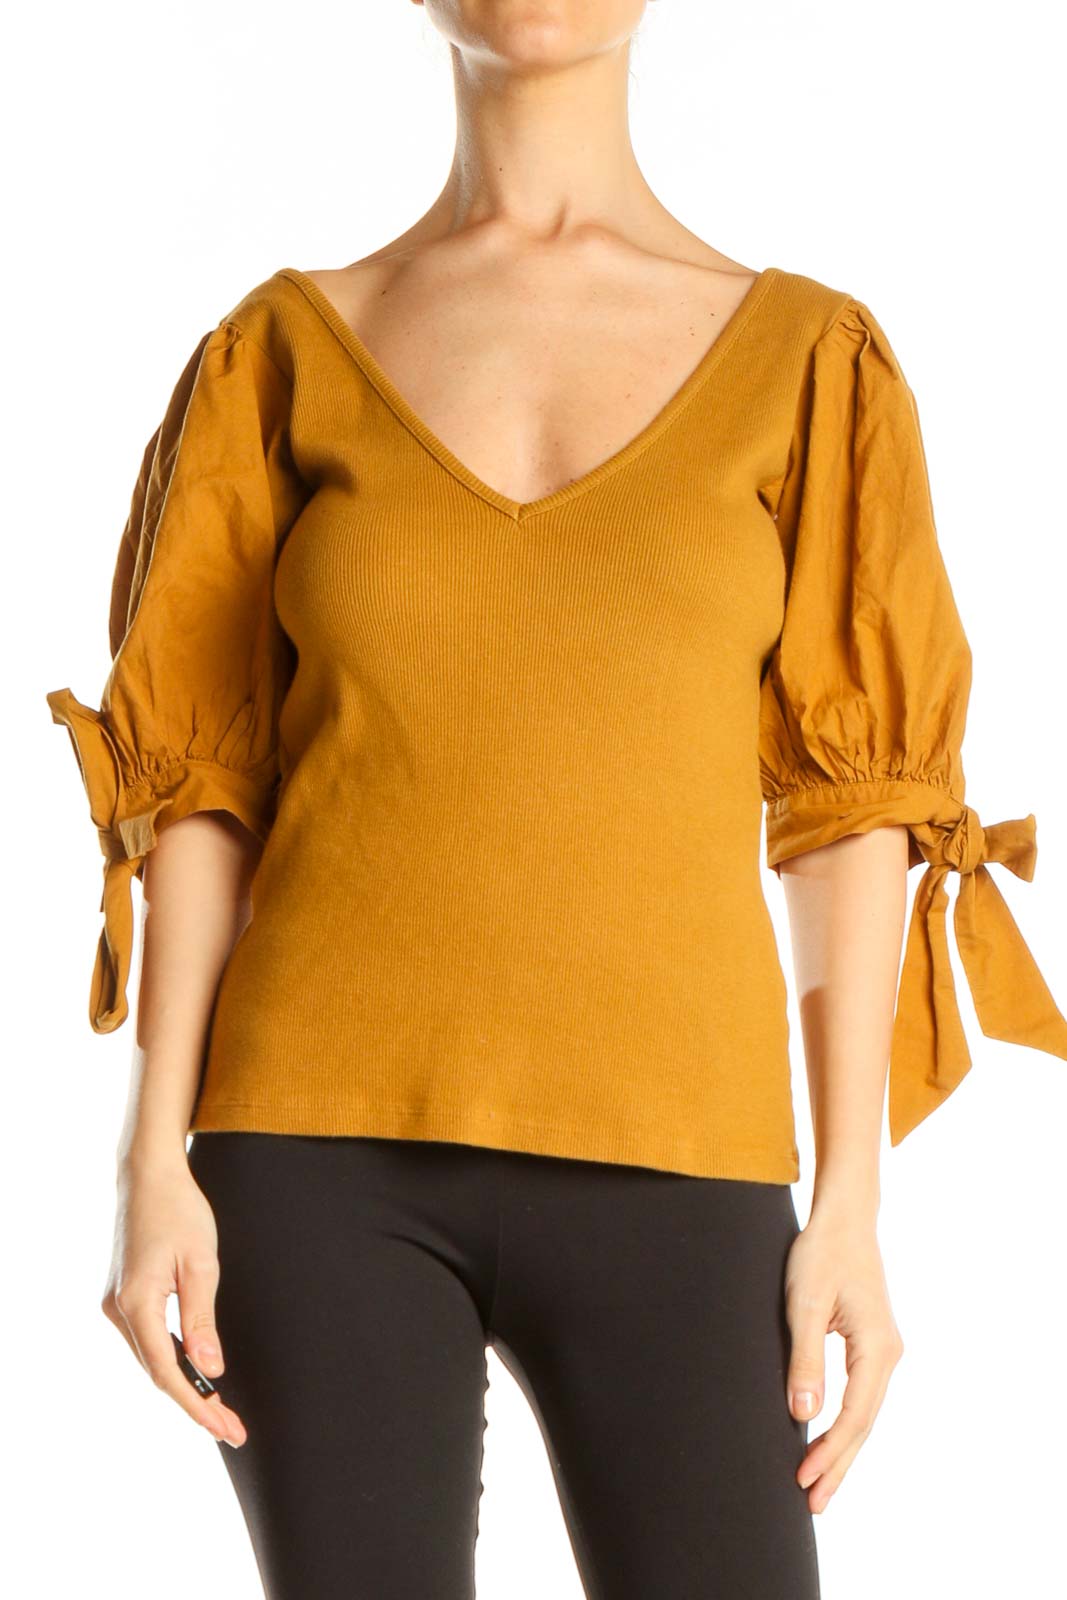 Yellow Chic Top With Puffy Sleeves Front